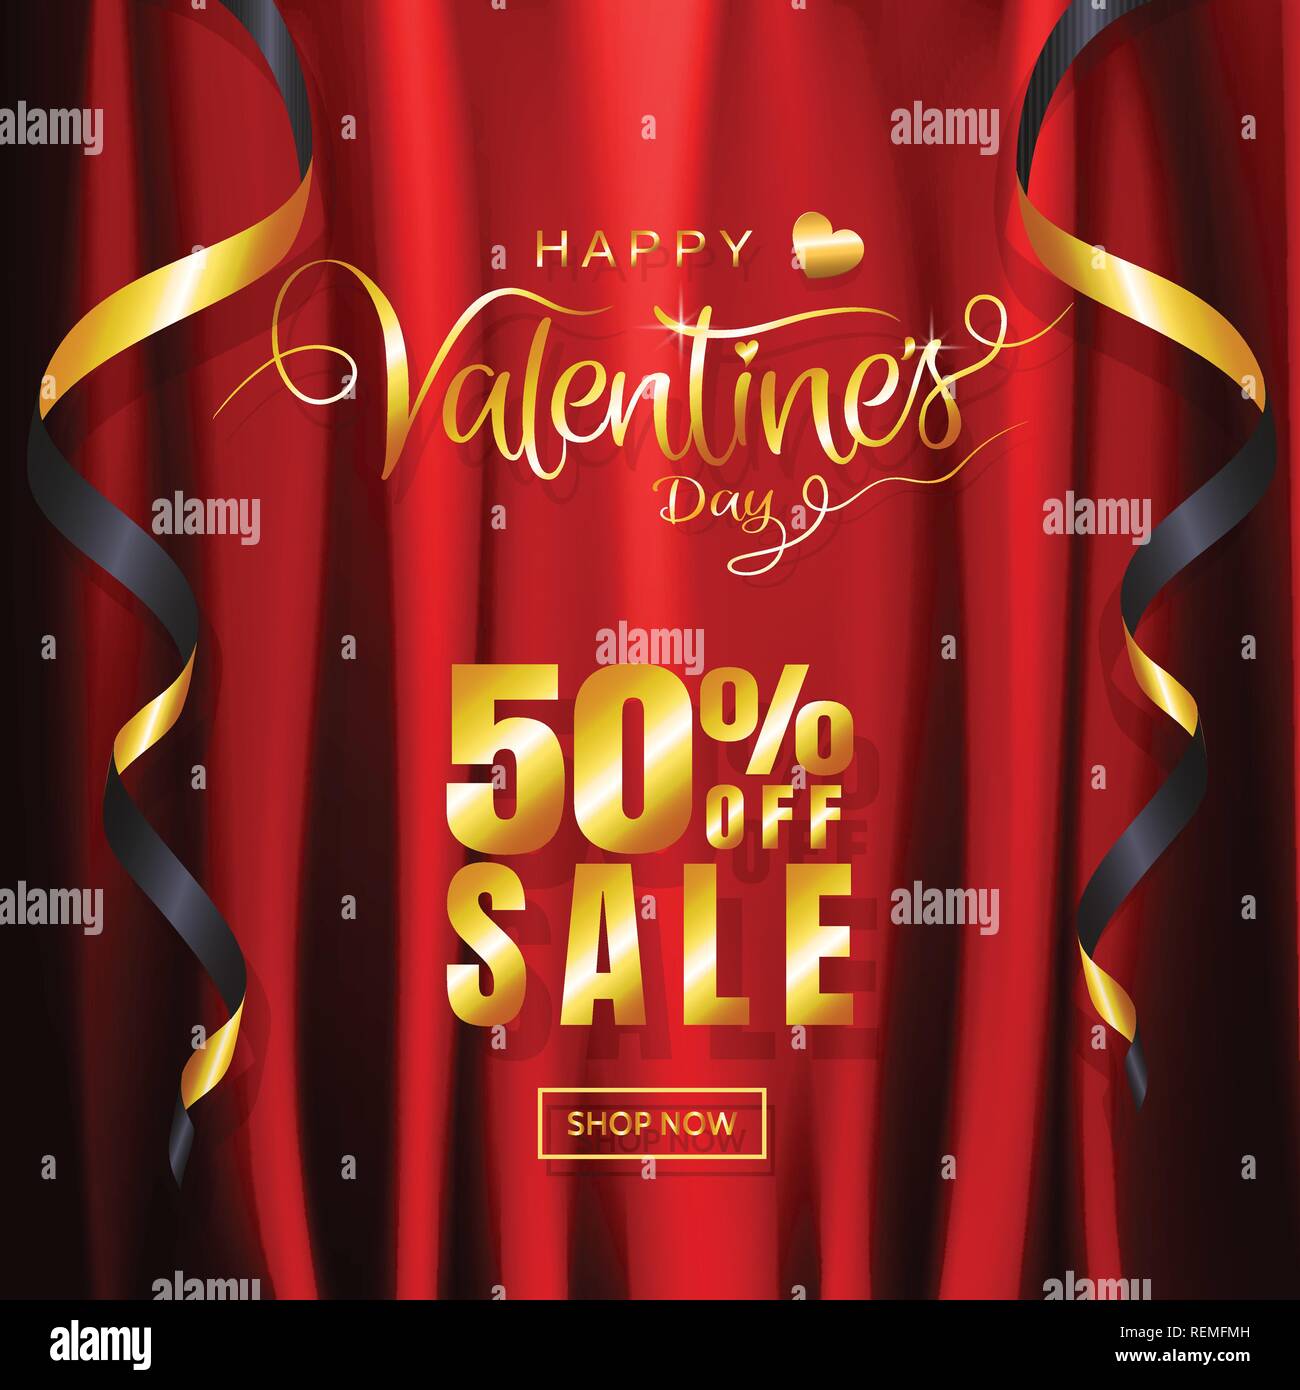 Luxury Valentine's day sale background glitter calligraphy and ornamental decoration in red gold on red satin, silk fabric background template layout  Stock Vector